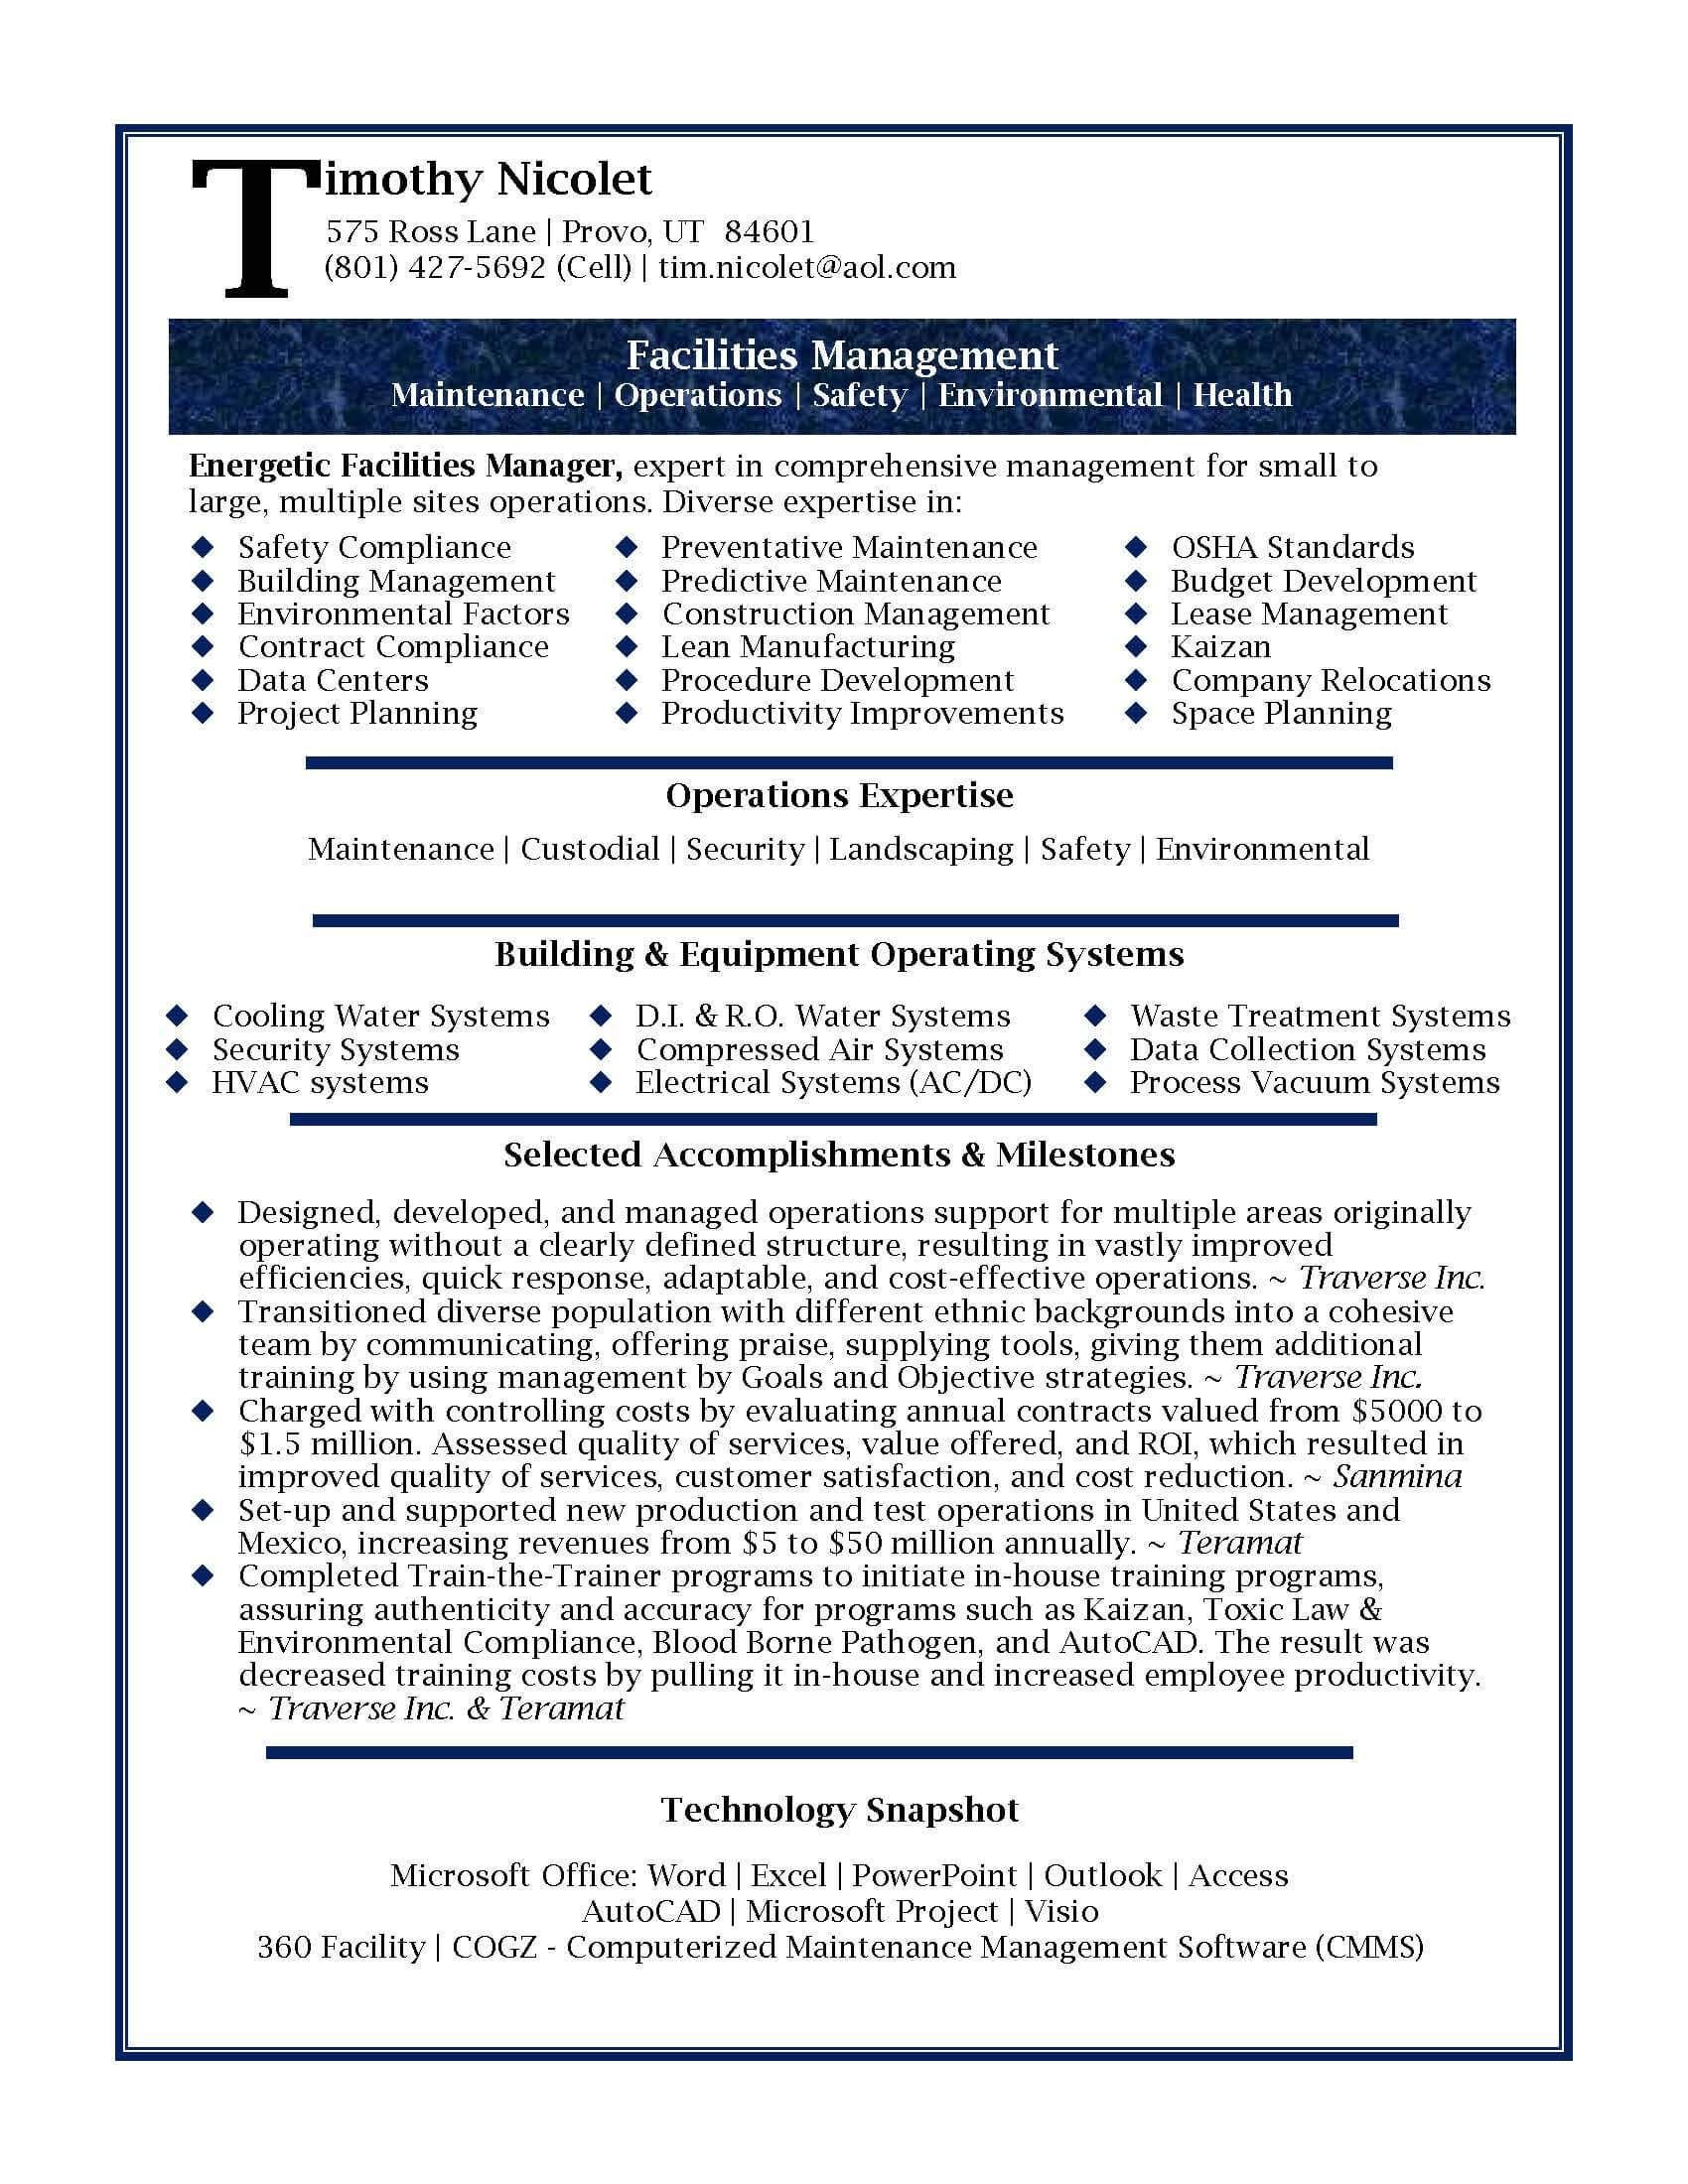 Data Center Facilities Engineer Resume Sample Resume Samples Were Written by Julie Walraven Professional …